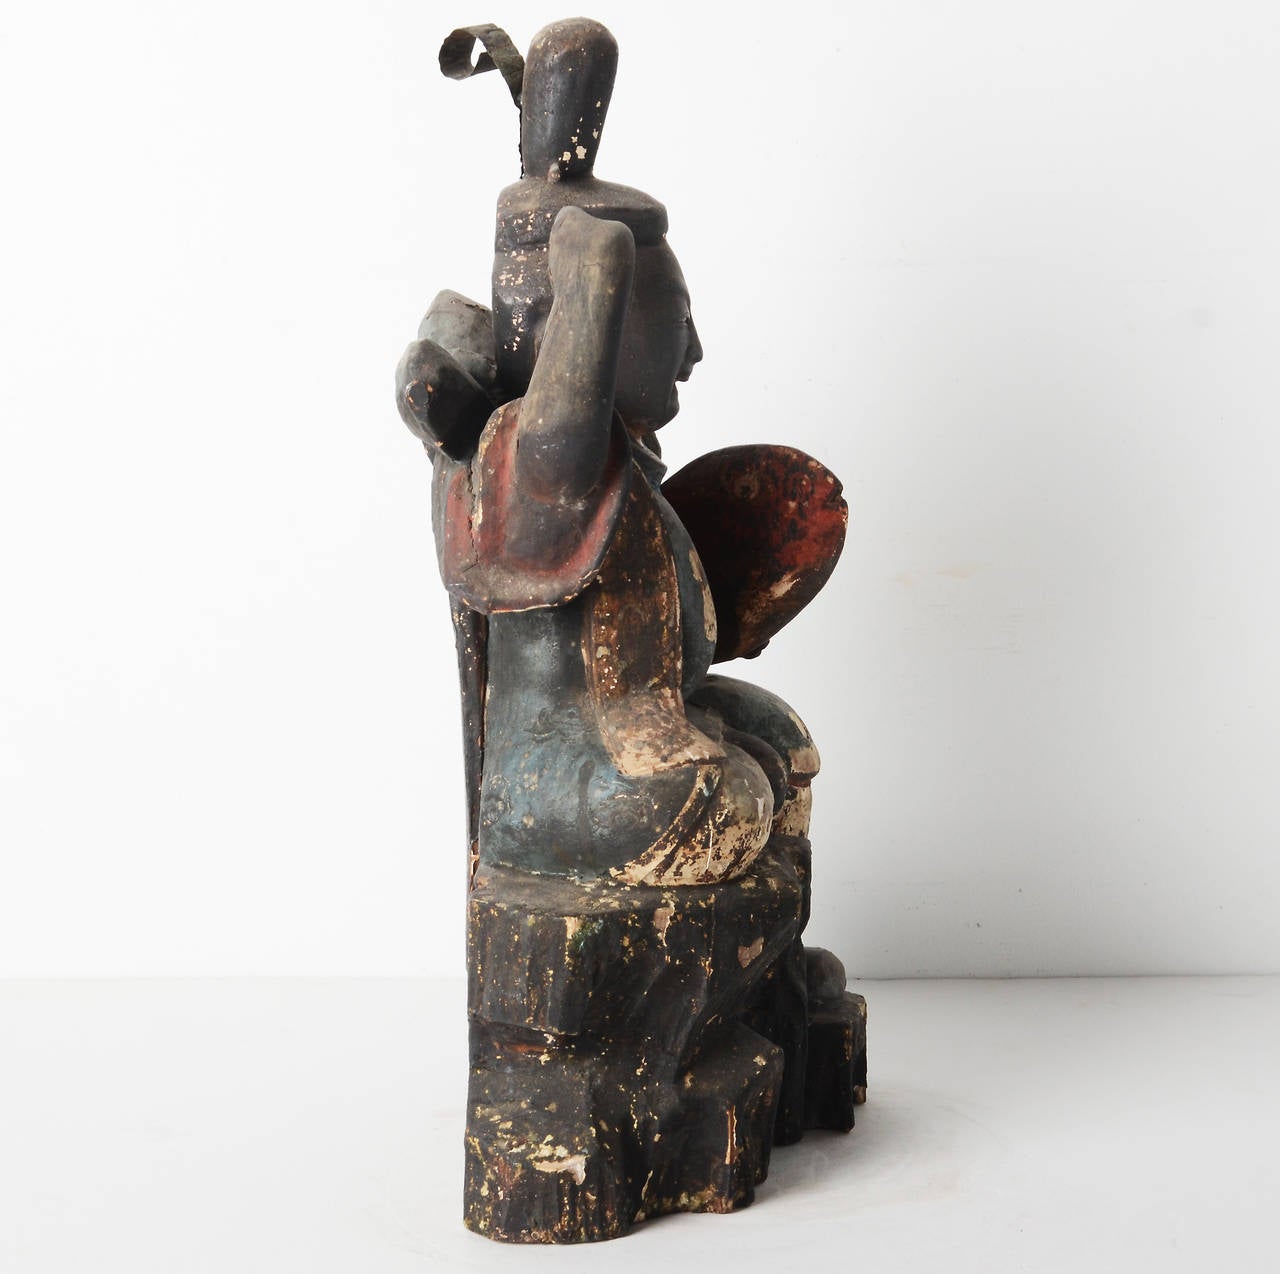 Rare statue of Ebisu, Shinto god of the household, god of the ocean, fishing folk, good forture and honest labor carrying a fish, polychrome on gesso on wood, 18th century.

Dimensions: H 42.5cm x W 22cm x D 12cm